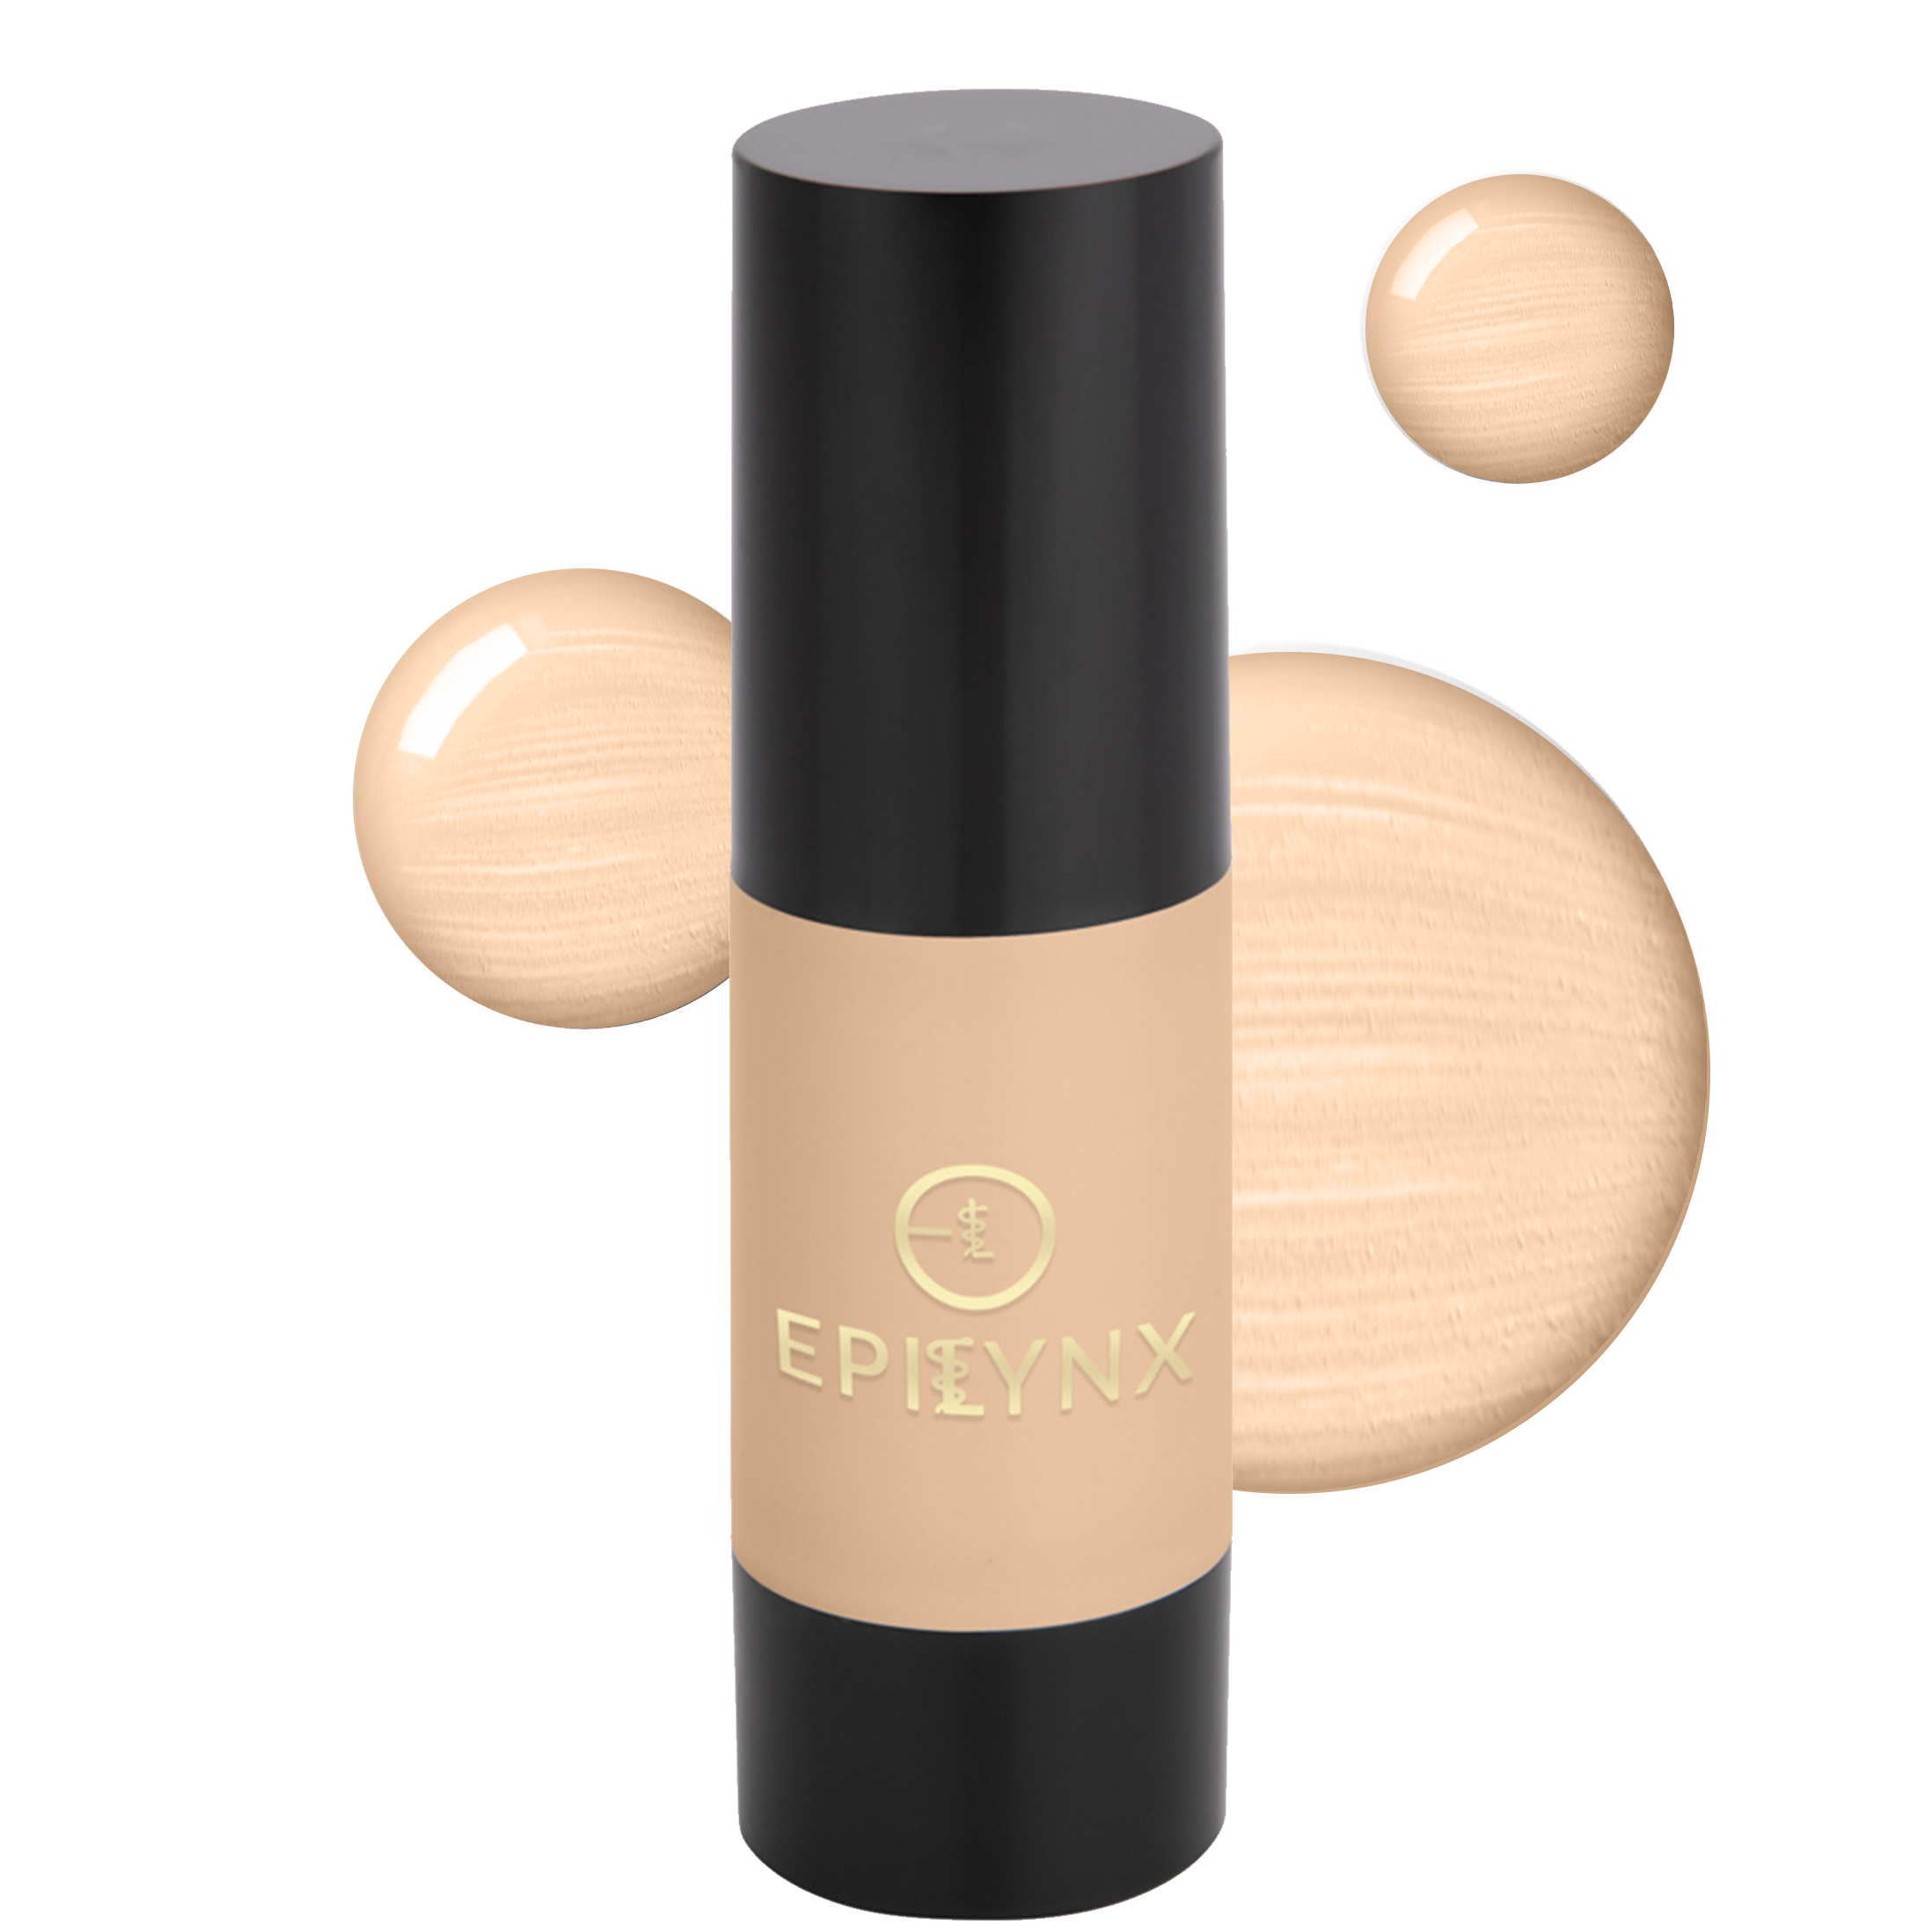 Full Coverage Foundation with SPF 15 – For Flawless Skin